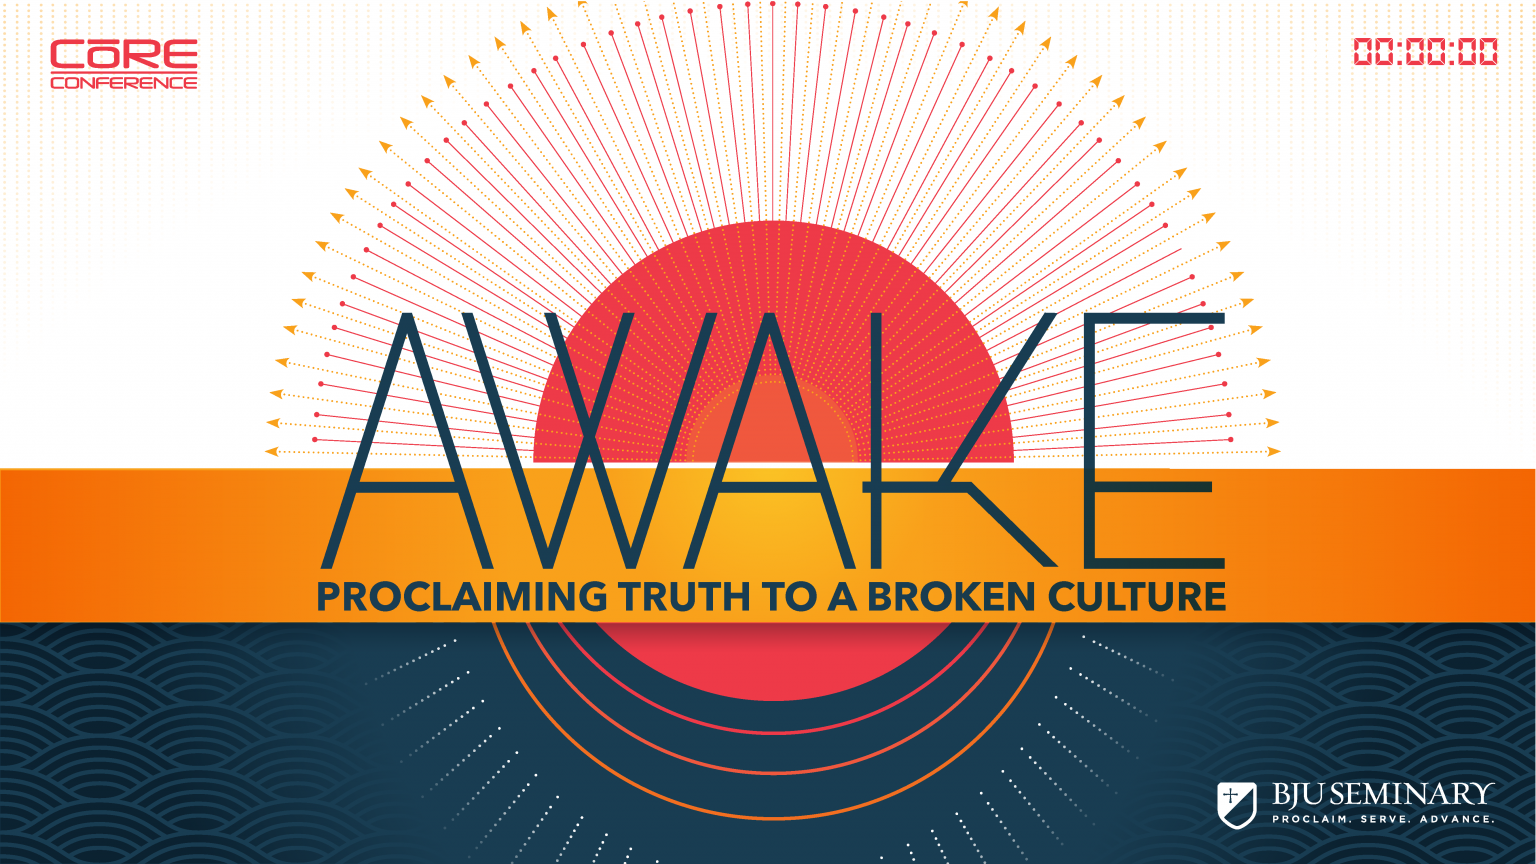 CoRE Conference 2022 AWAKE! Proclaiming Truth to a Broken Culture